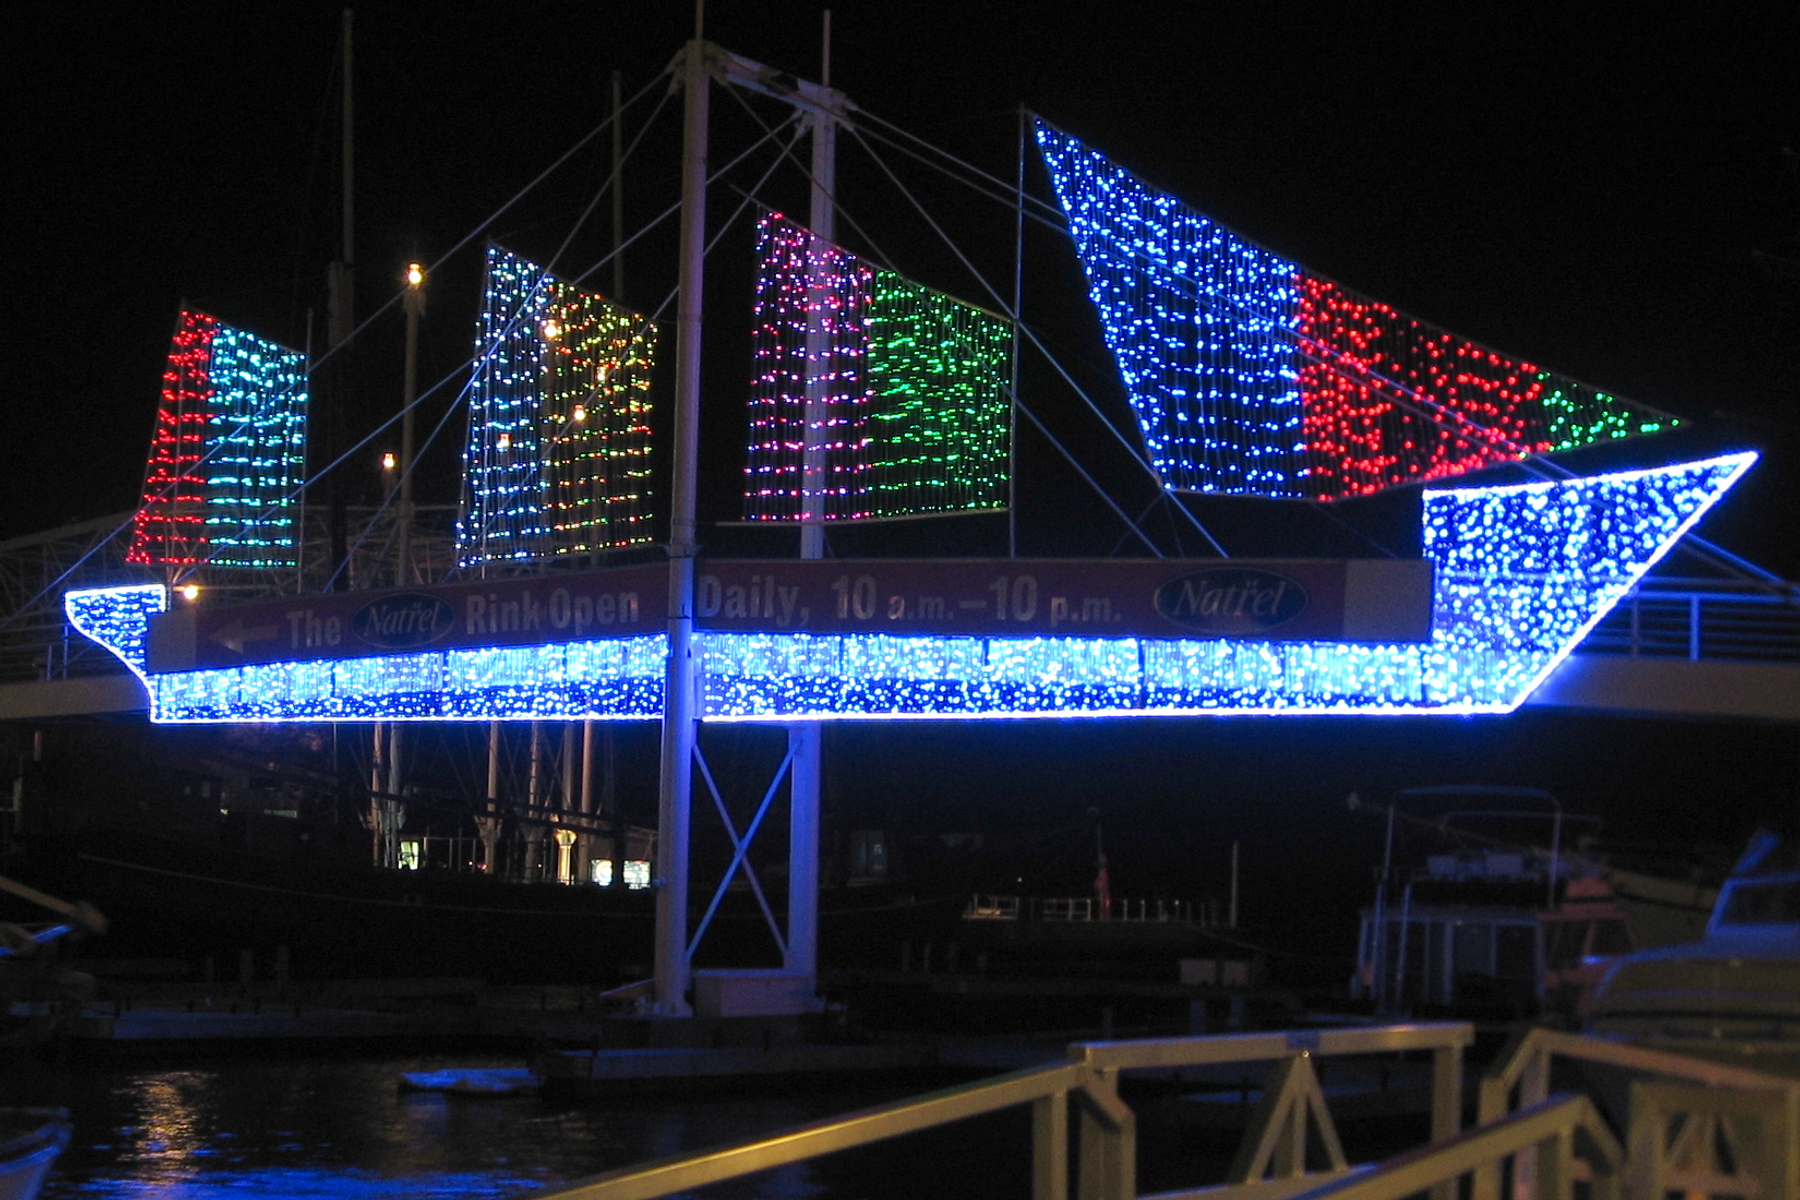 Blue, red and green lights of art display at Toronto Harbourfront Centre looking so beautiful at night.